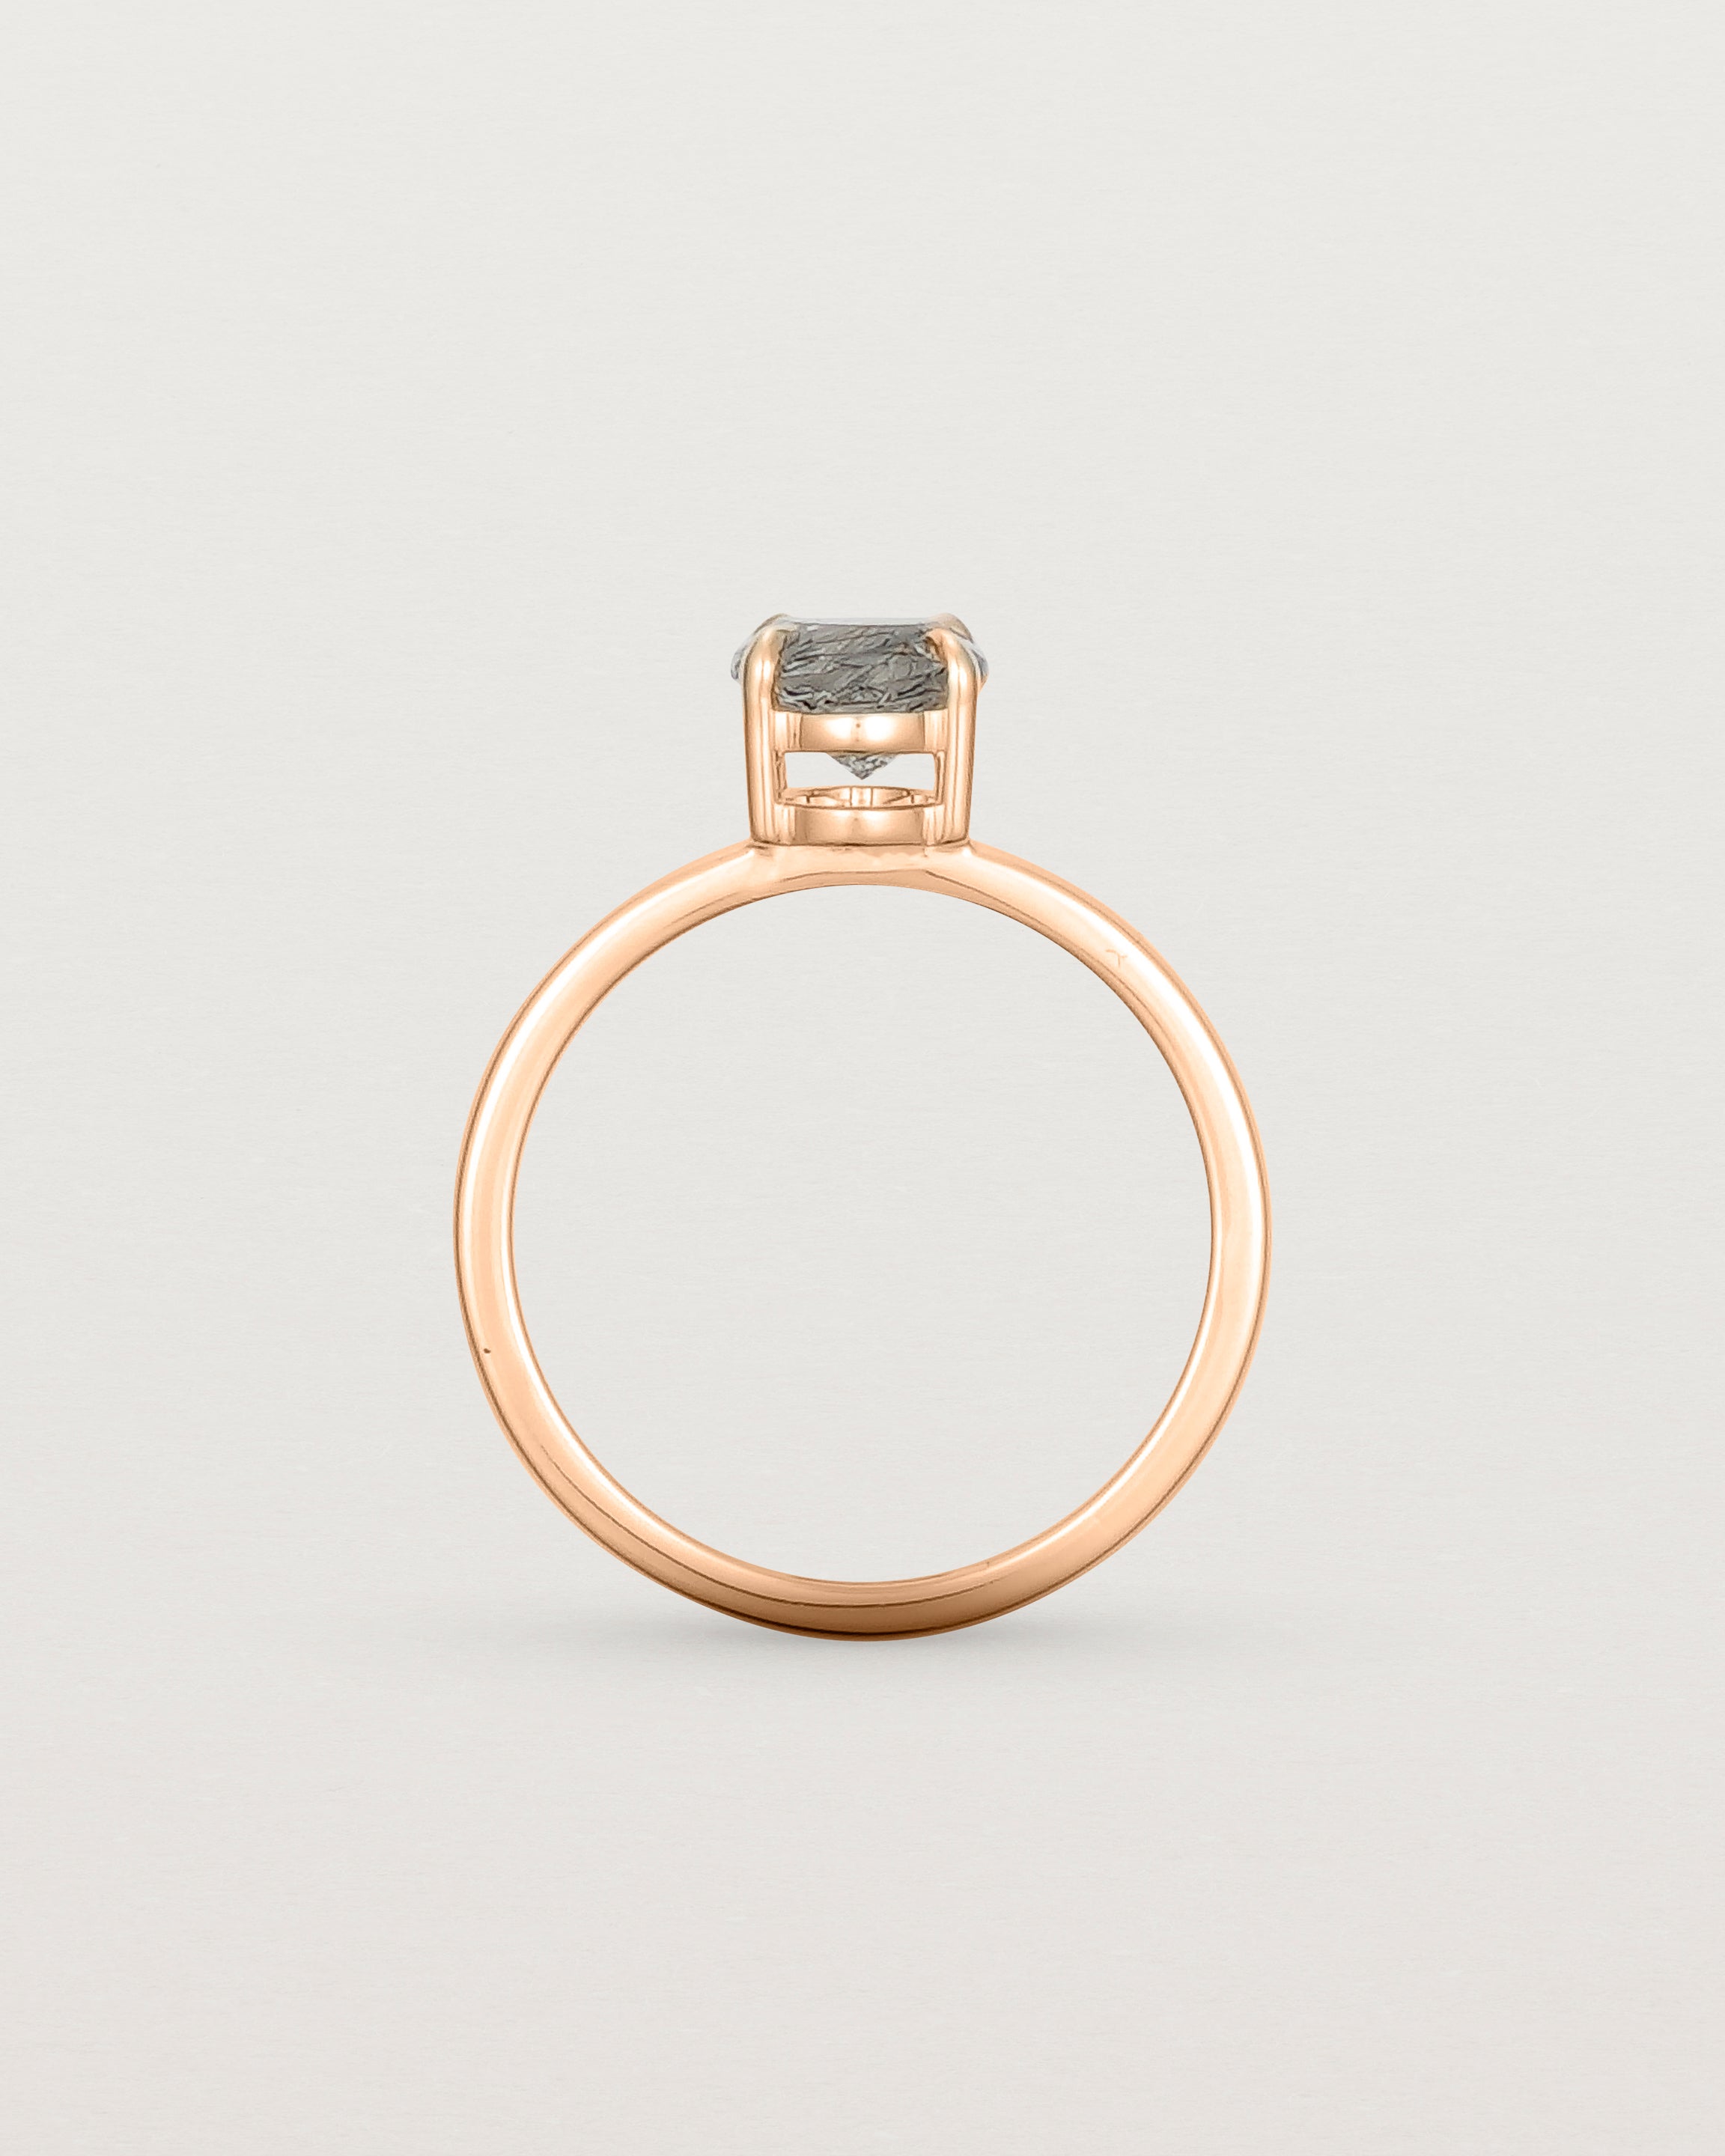 Standing view of the Una Oval Solitaire | Tourmalinated Quartz | Rose Gold.